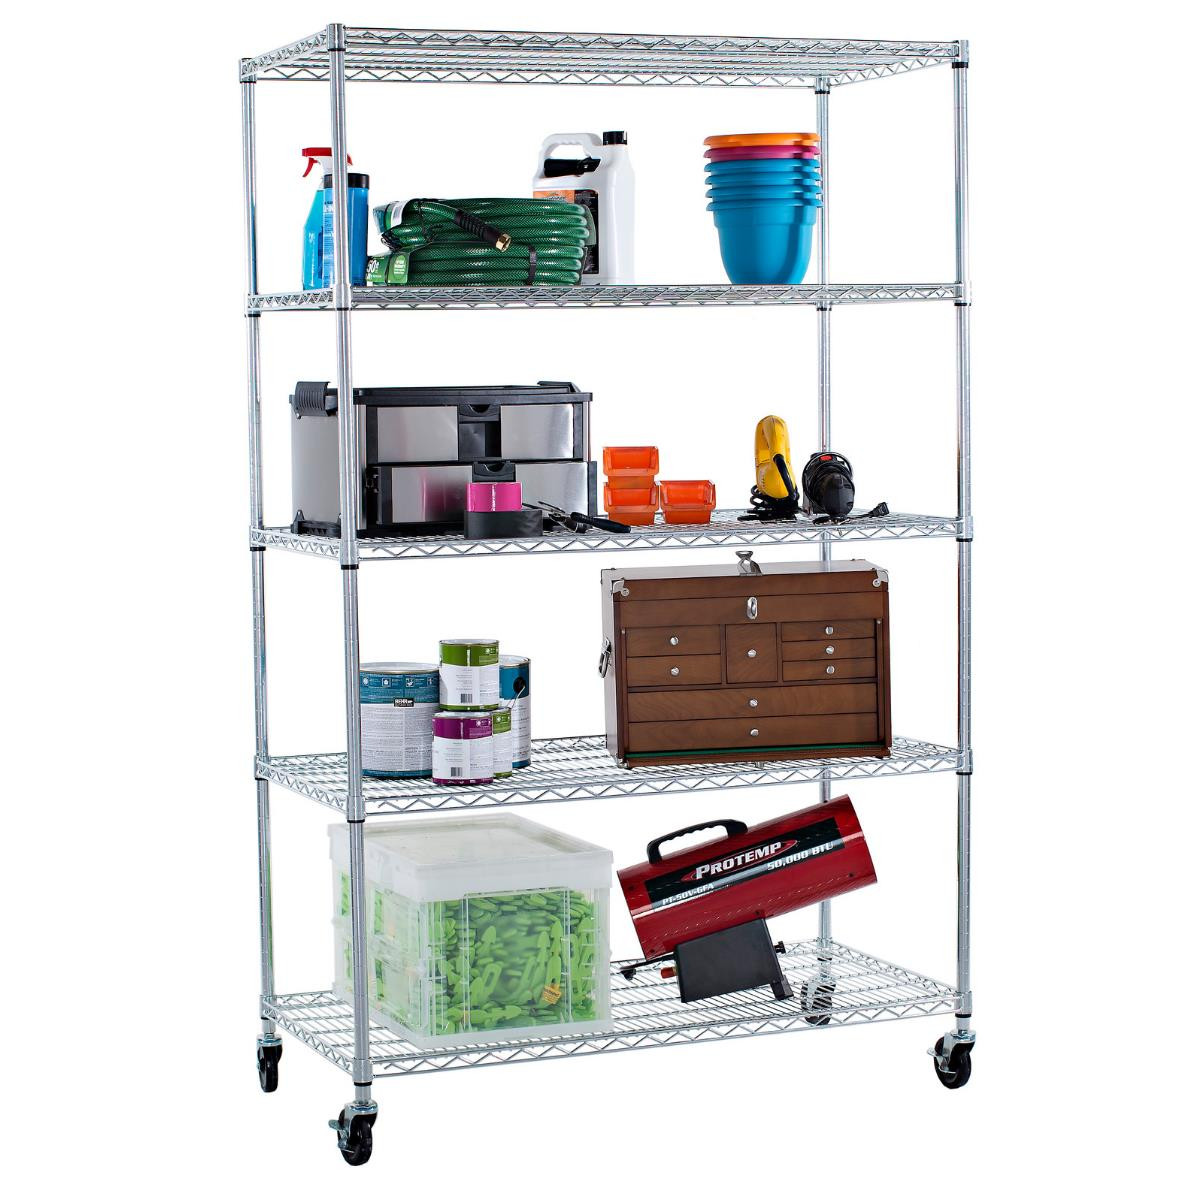 Picture for category Wire Shelves